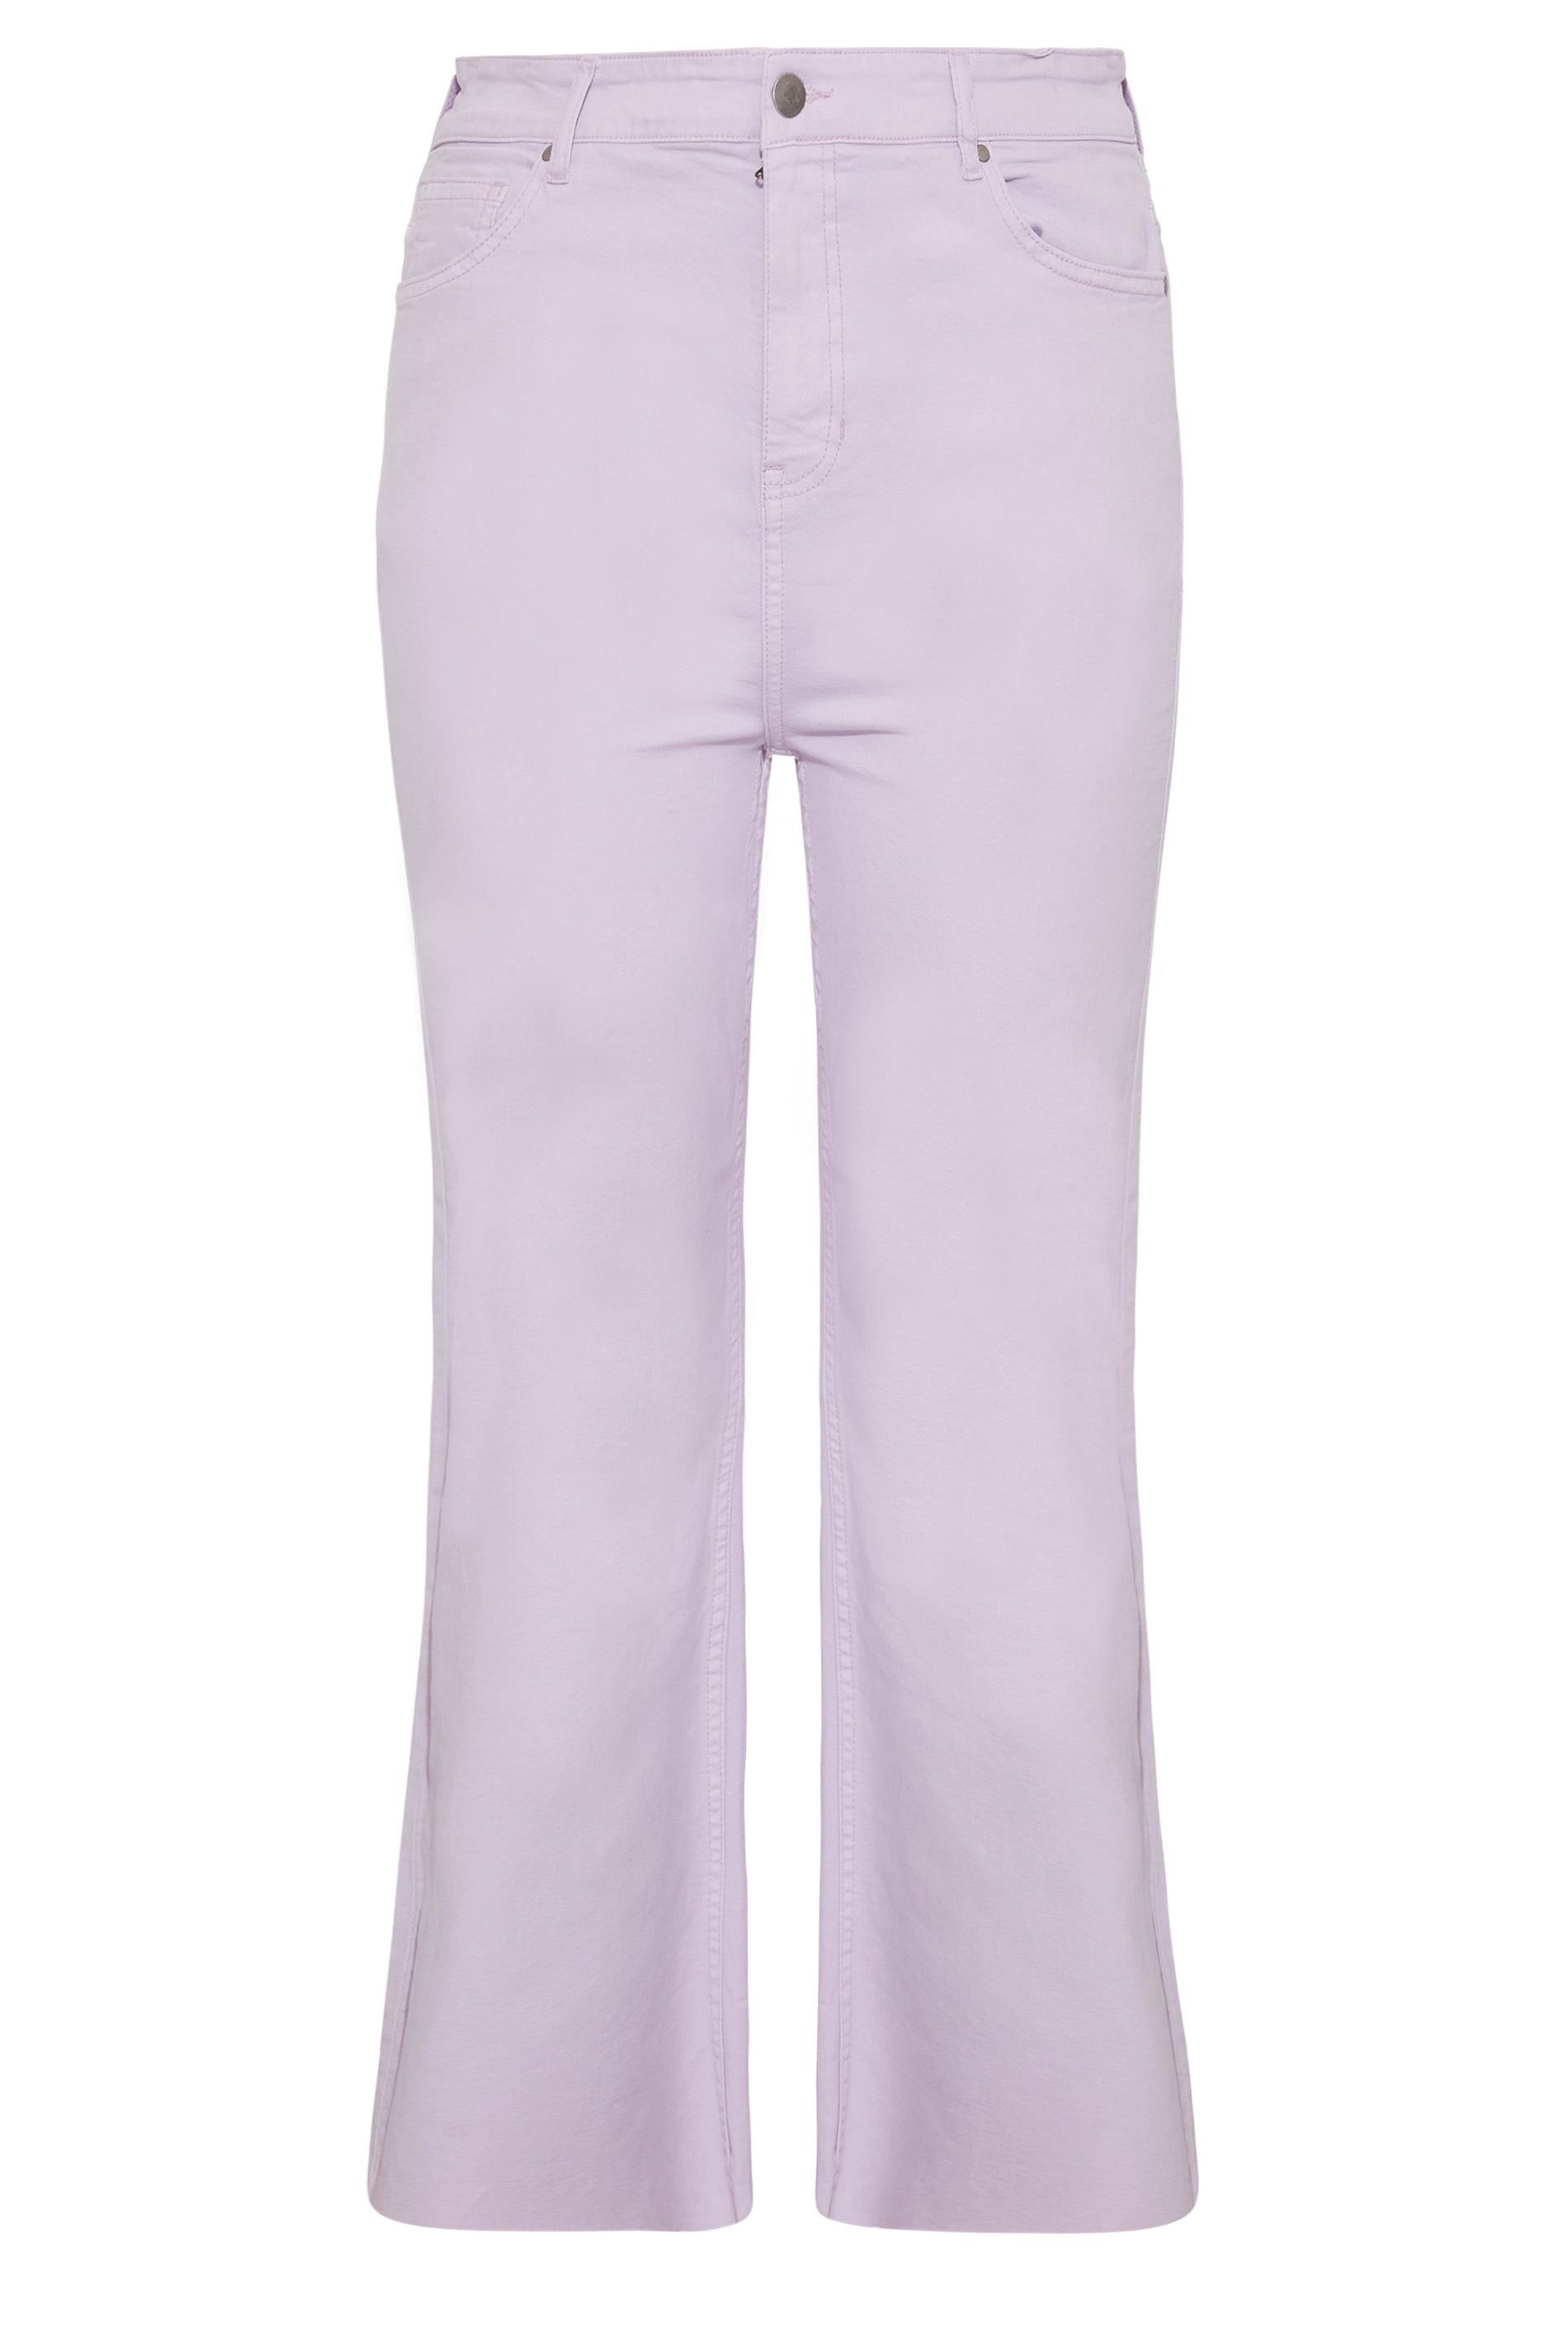 Plus Size Lilac Purple Stretch Wide Leg Jeans | Yours Clothing